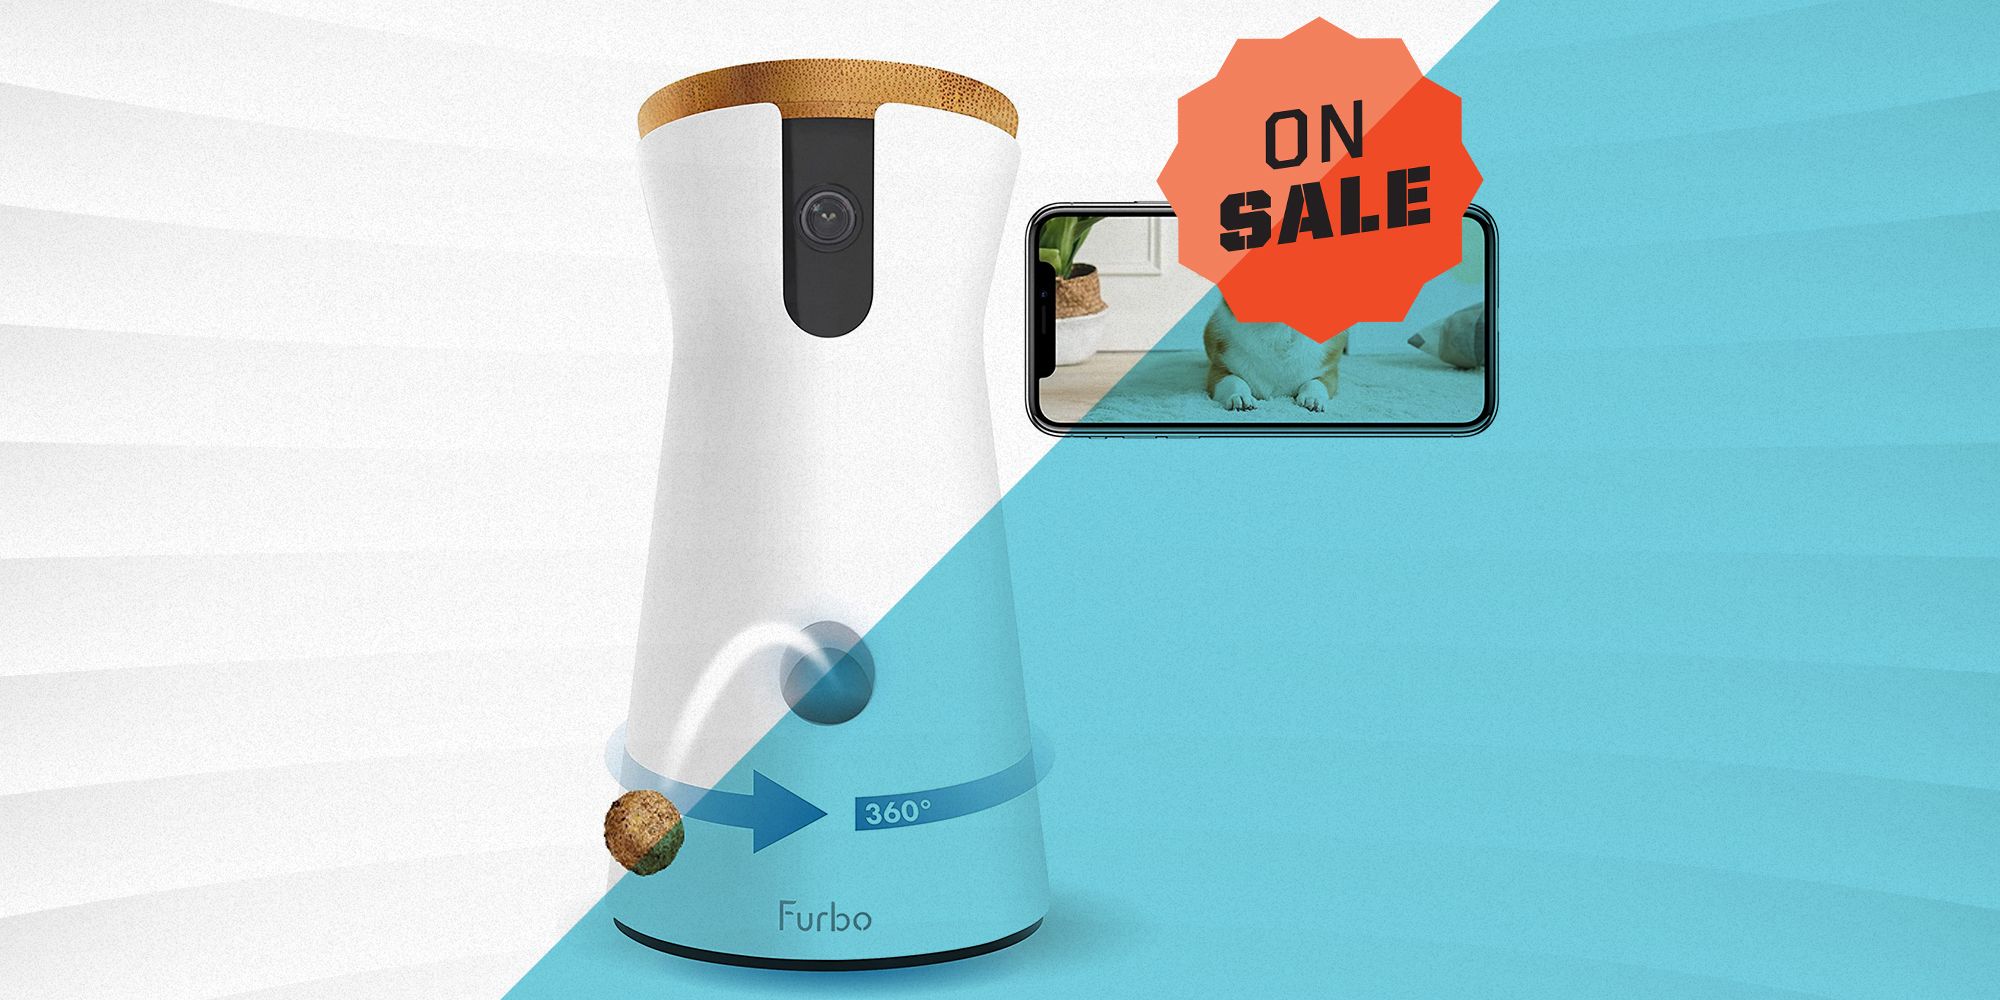 Keep an Eye on Your Pets With the Furbo 360° Dog Camera That's 30